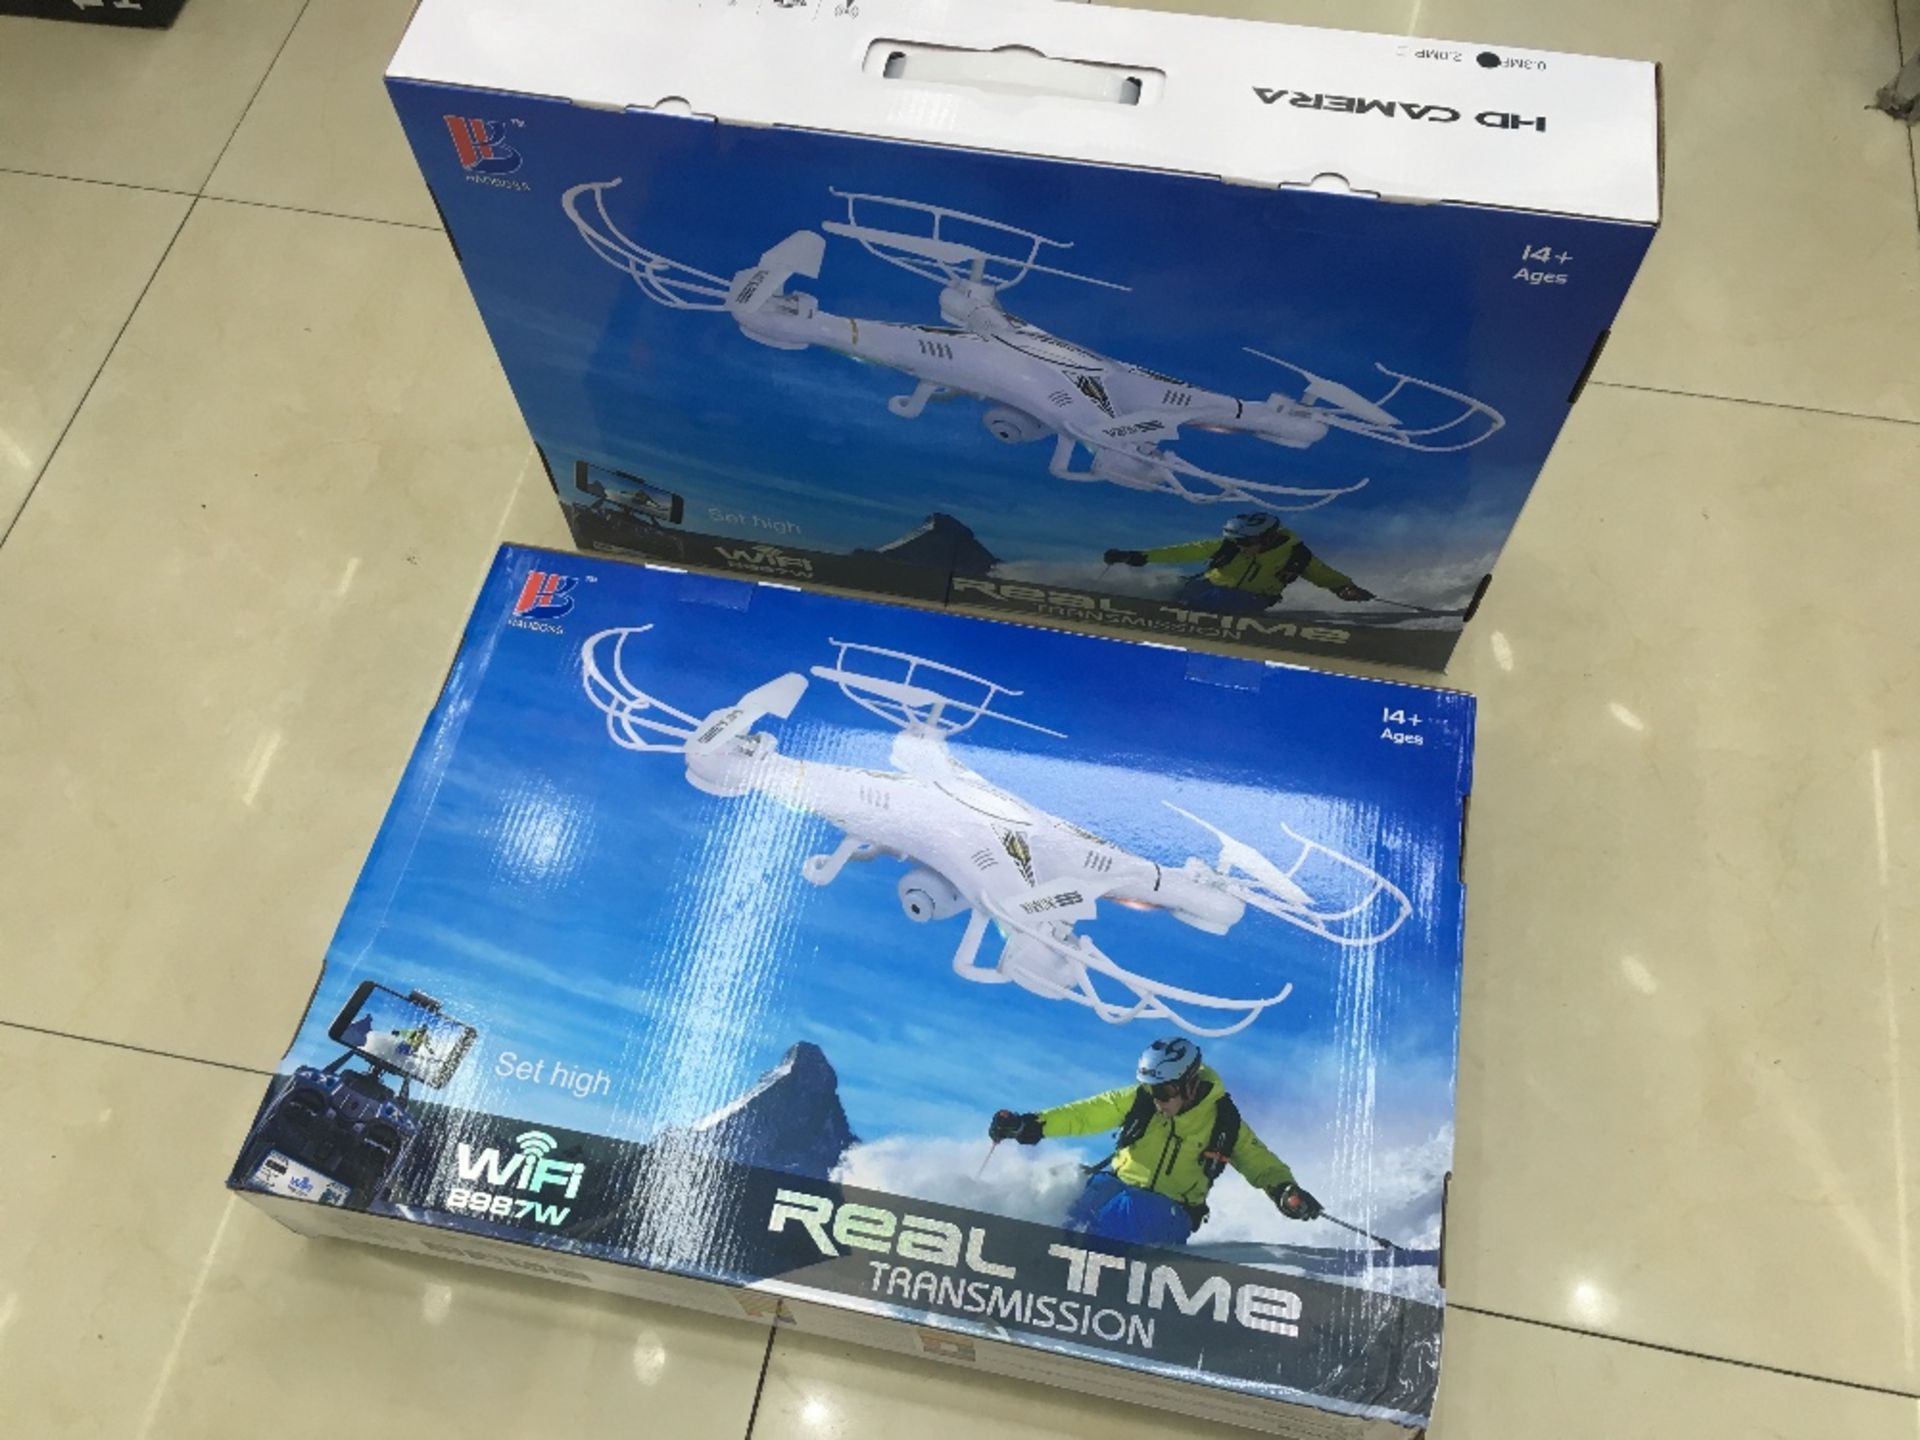 NEW BOXED 2016 WIFI QUADCOPTER – CONNECTS TO SMARTPHONE VIA FPV FOR FULL HD VIEWING